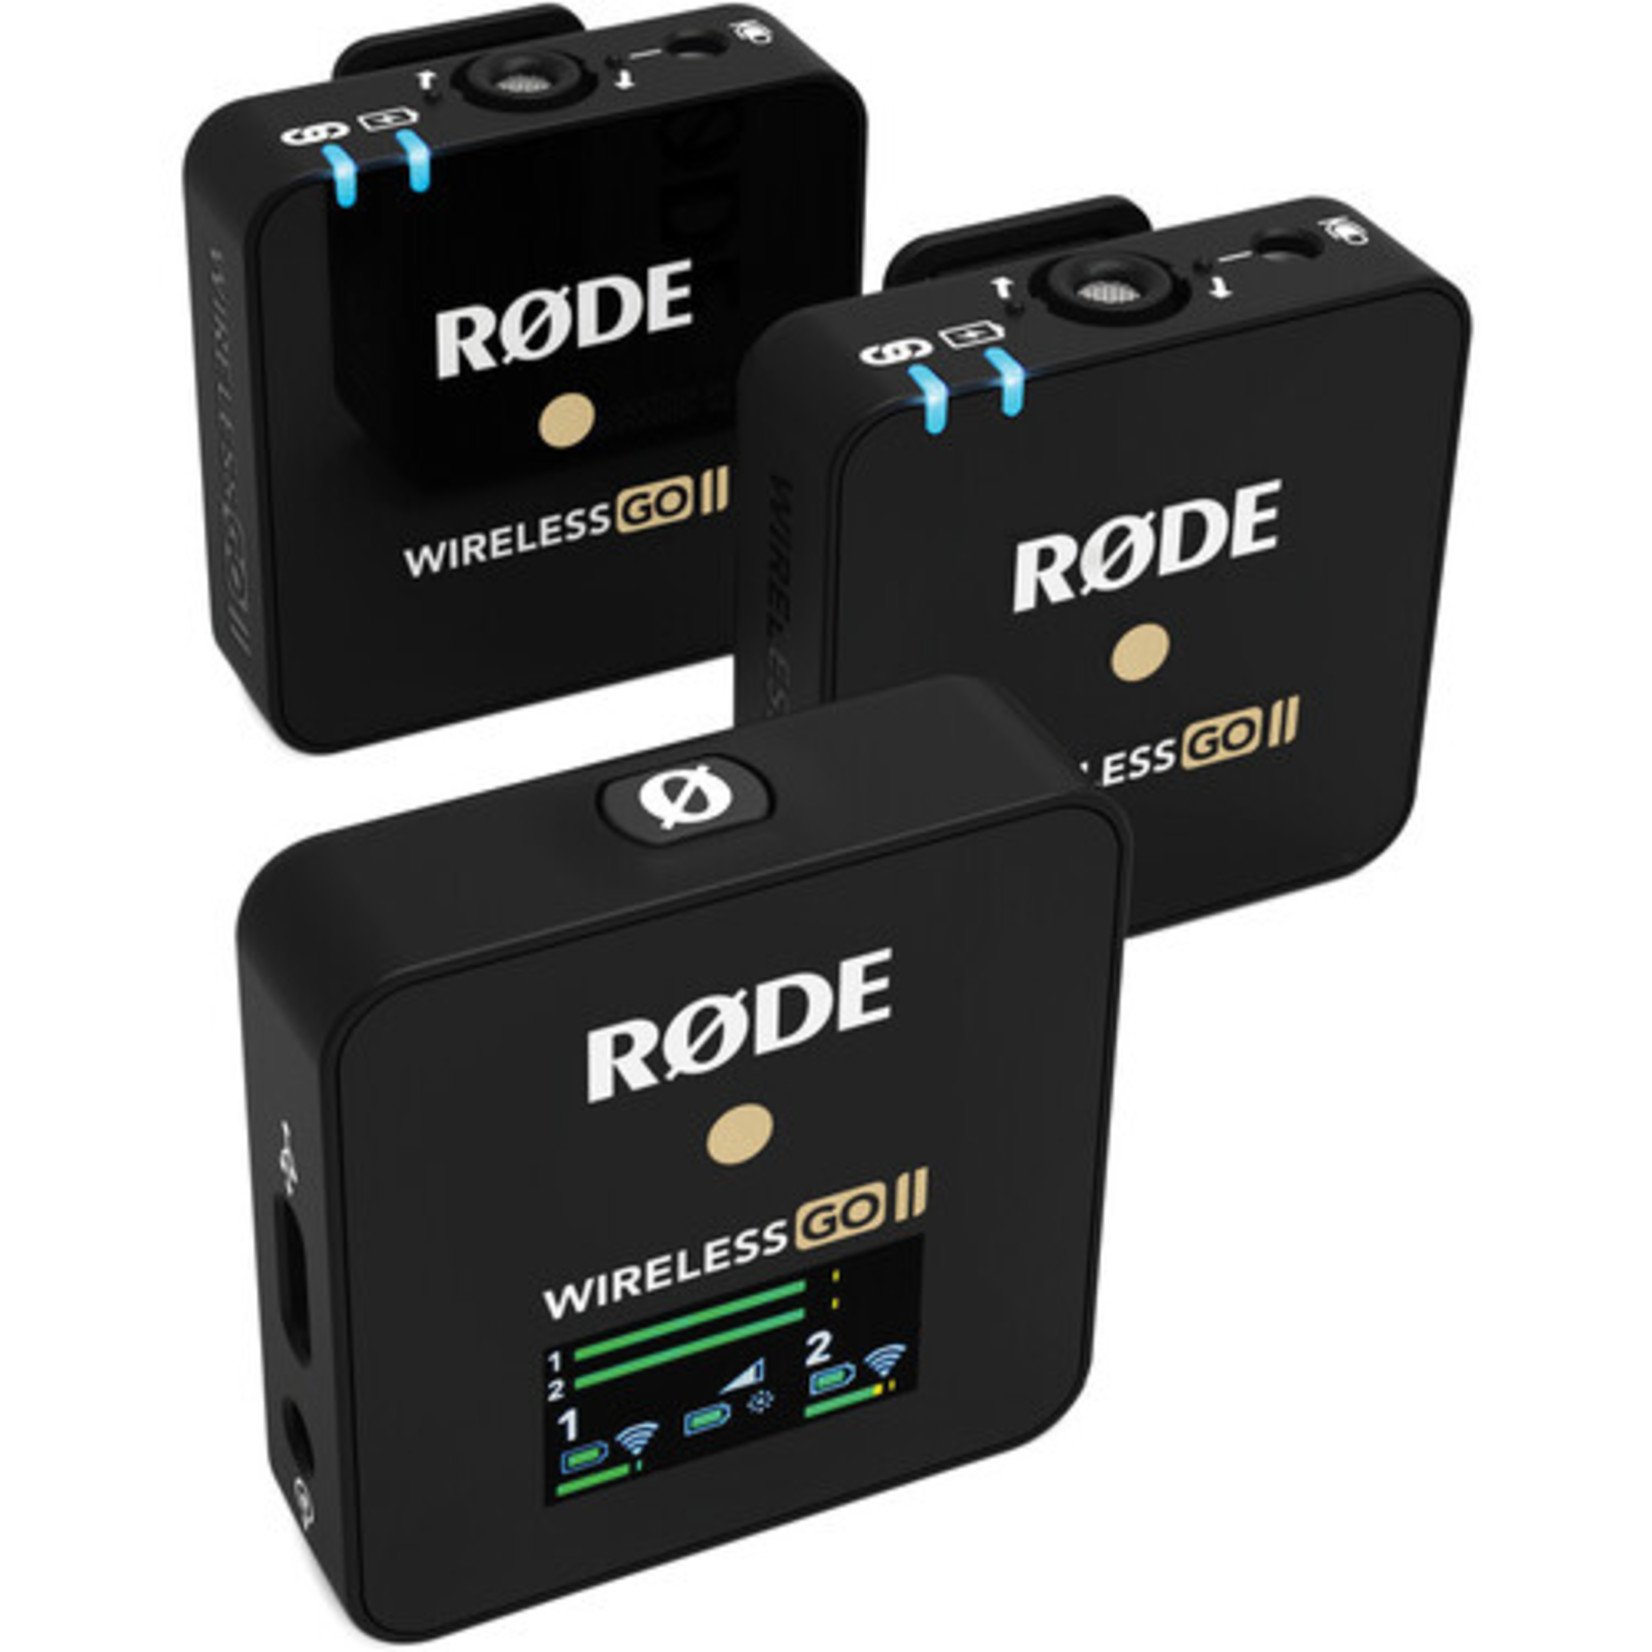 Rode Rode Wireless GO II 2-Person Compact Digital Wireless Microphone System/Recorder (2.4 GHz, Black)